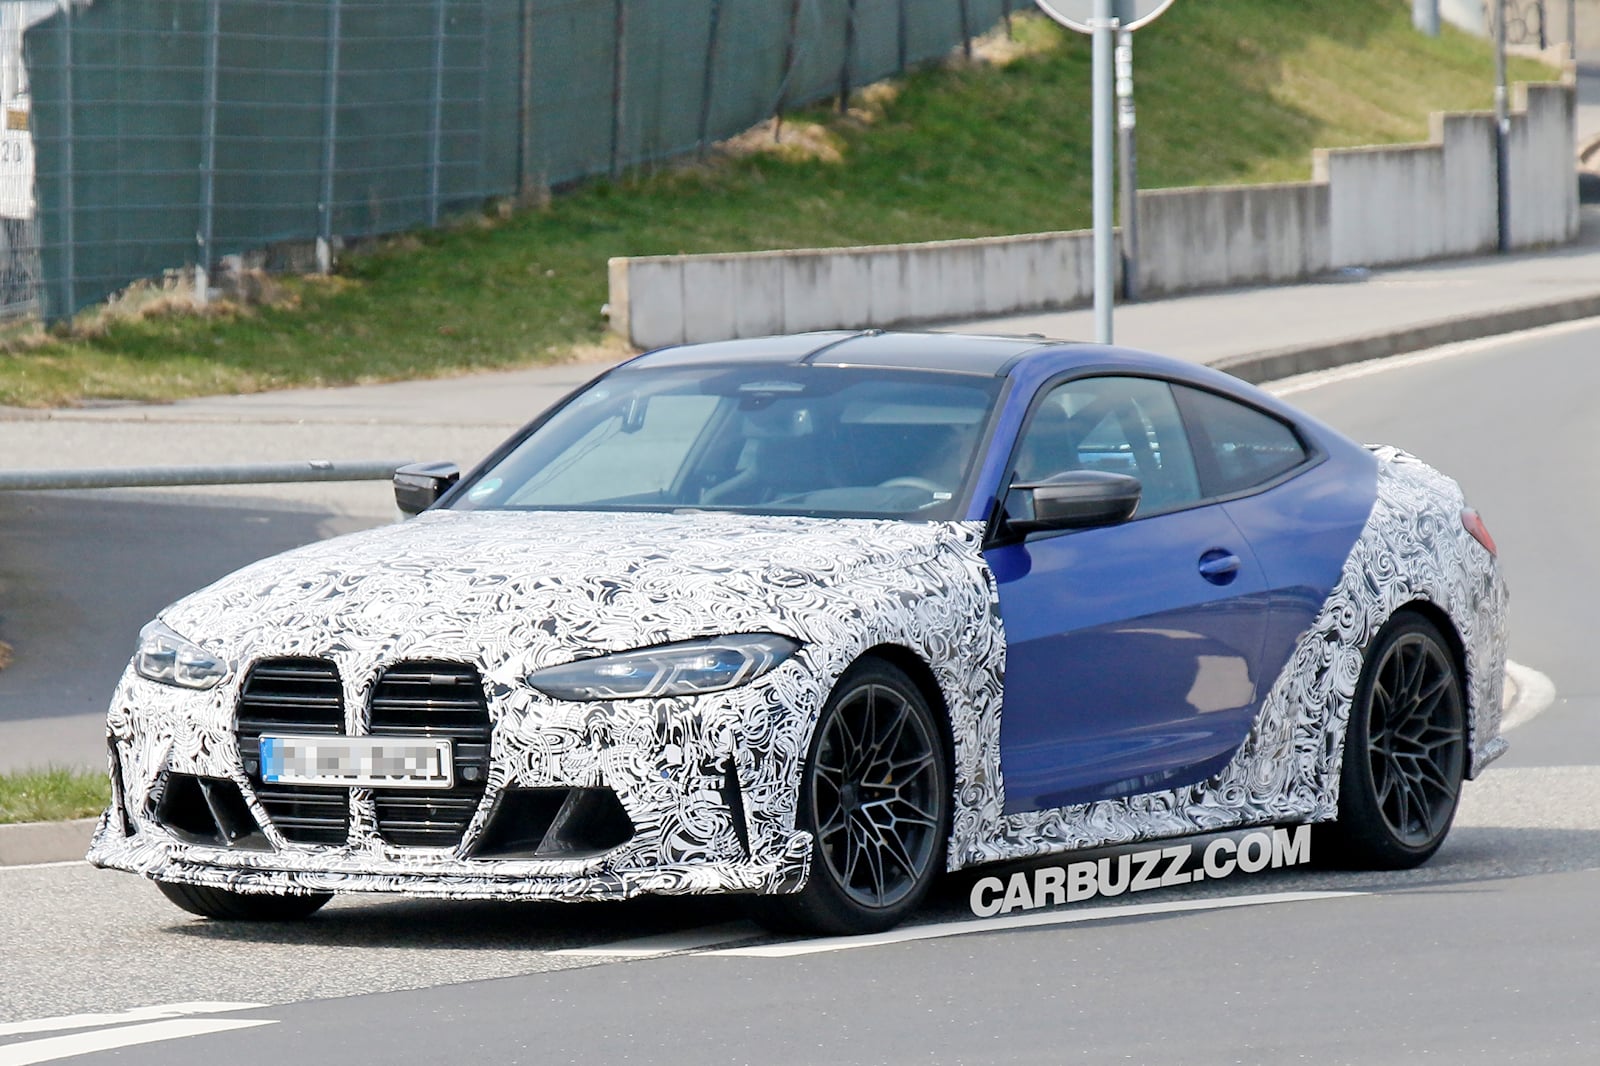 BMW Confirms The M4 Weve Been Waiting For